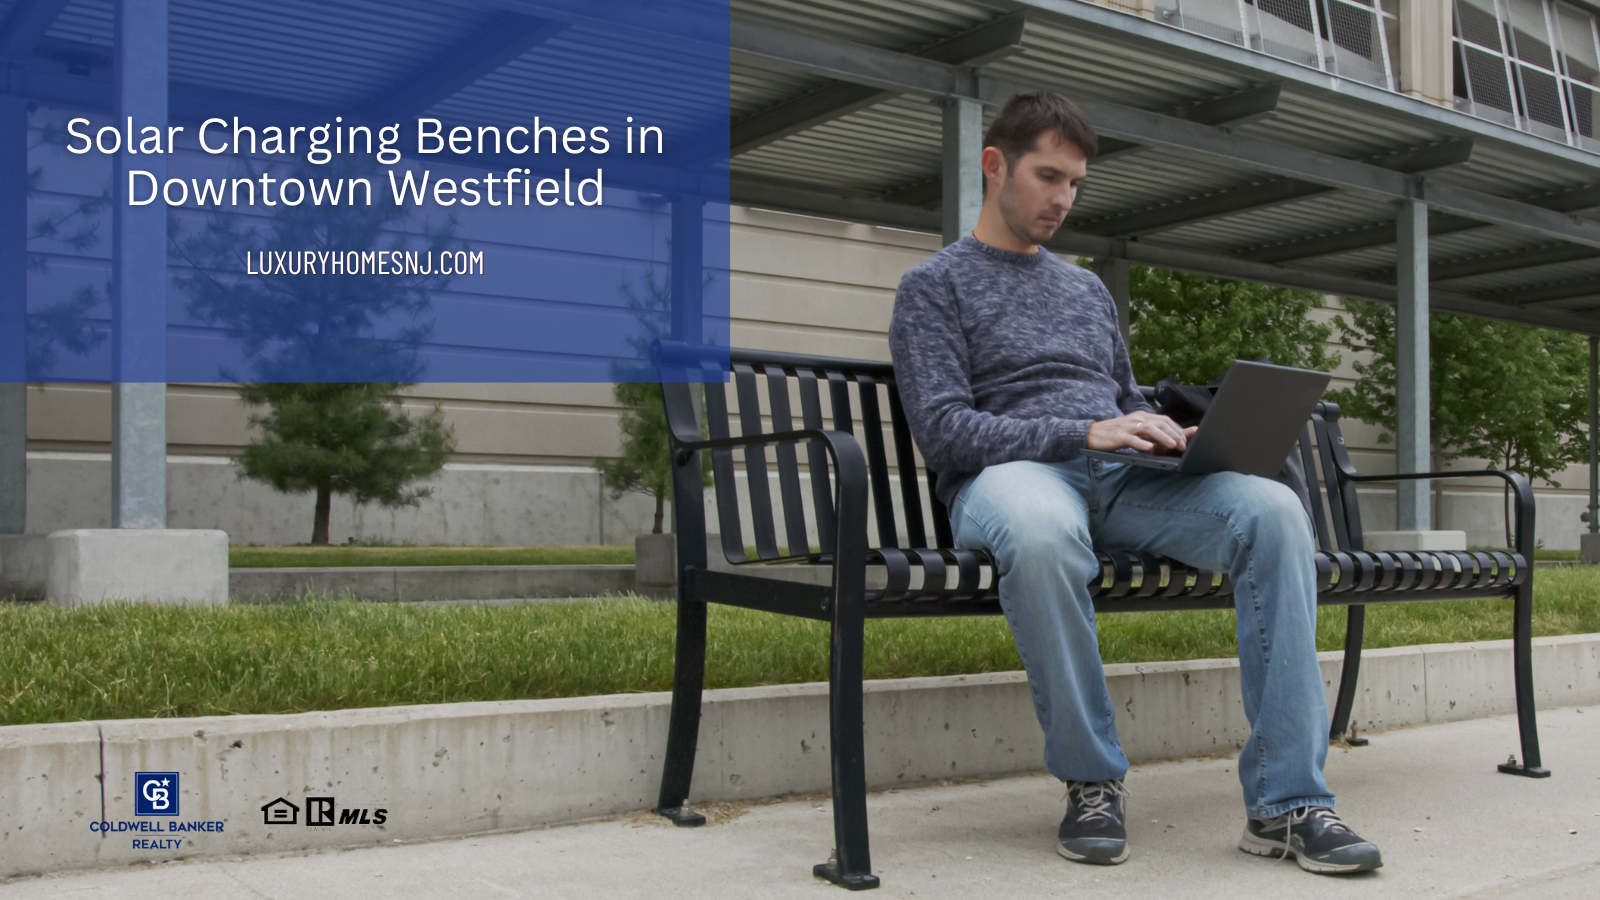 Solar_Charging_Benches_in_Downtown_Westfield_lg.png